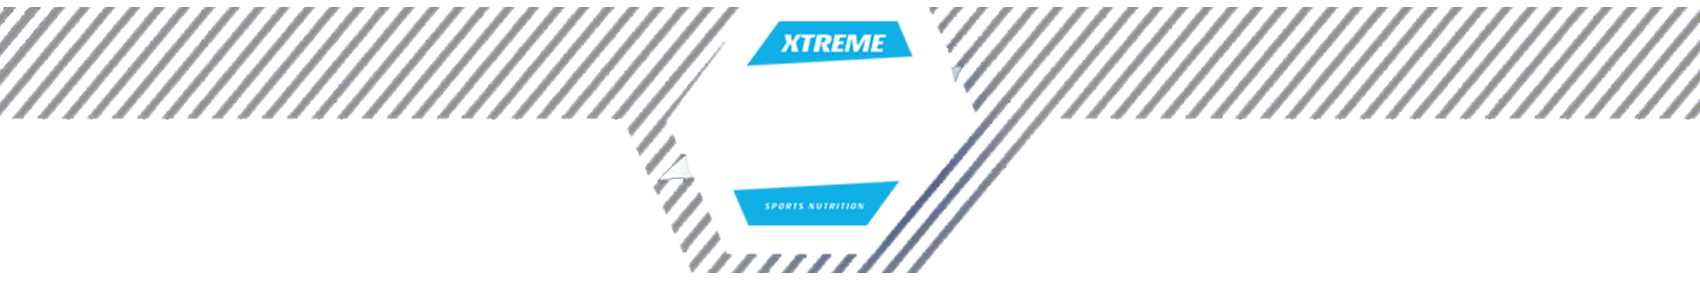 Xtreme Sports Nutrition